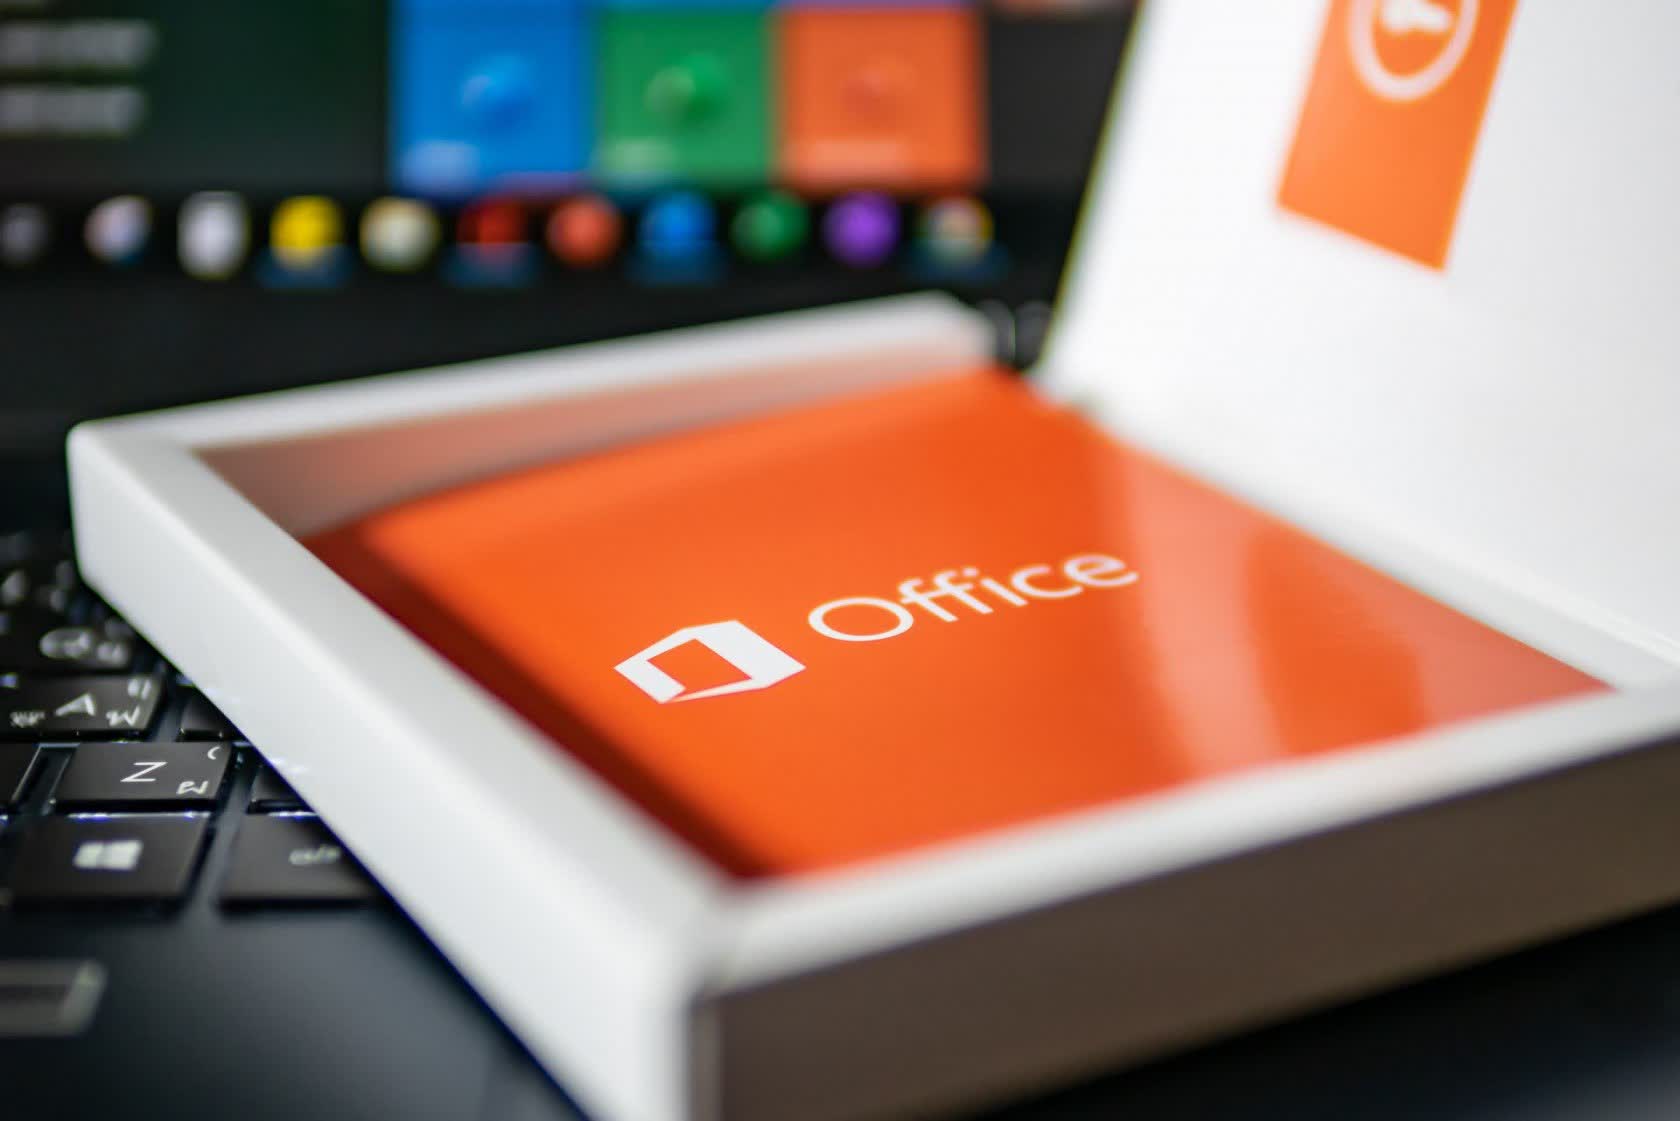 office for mac standalone updates